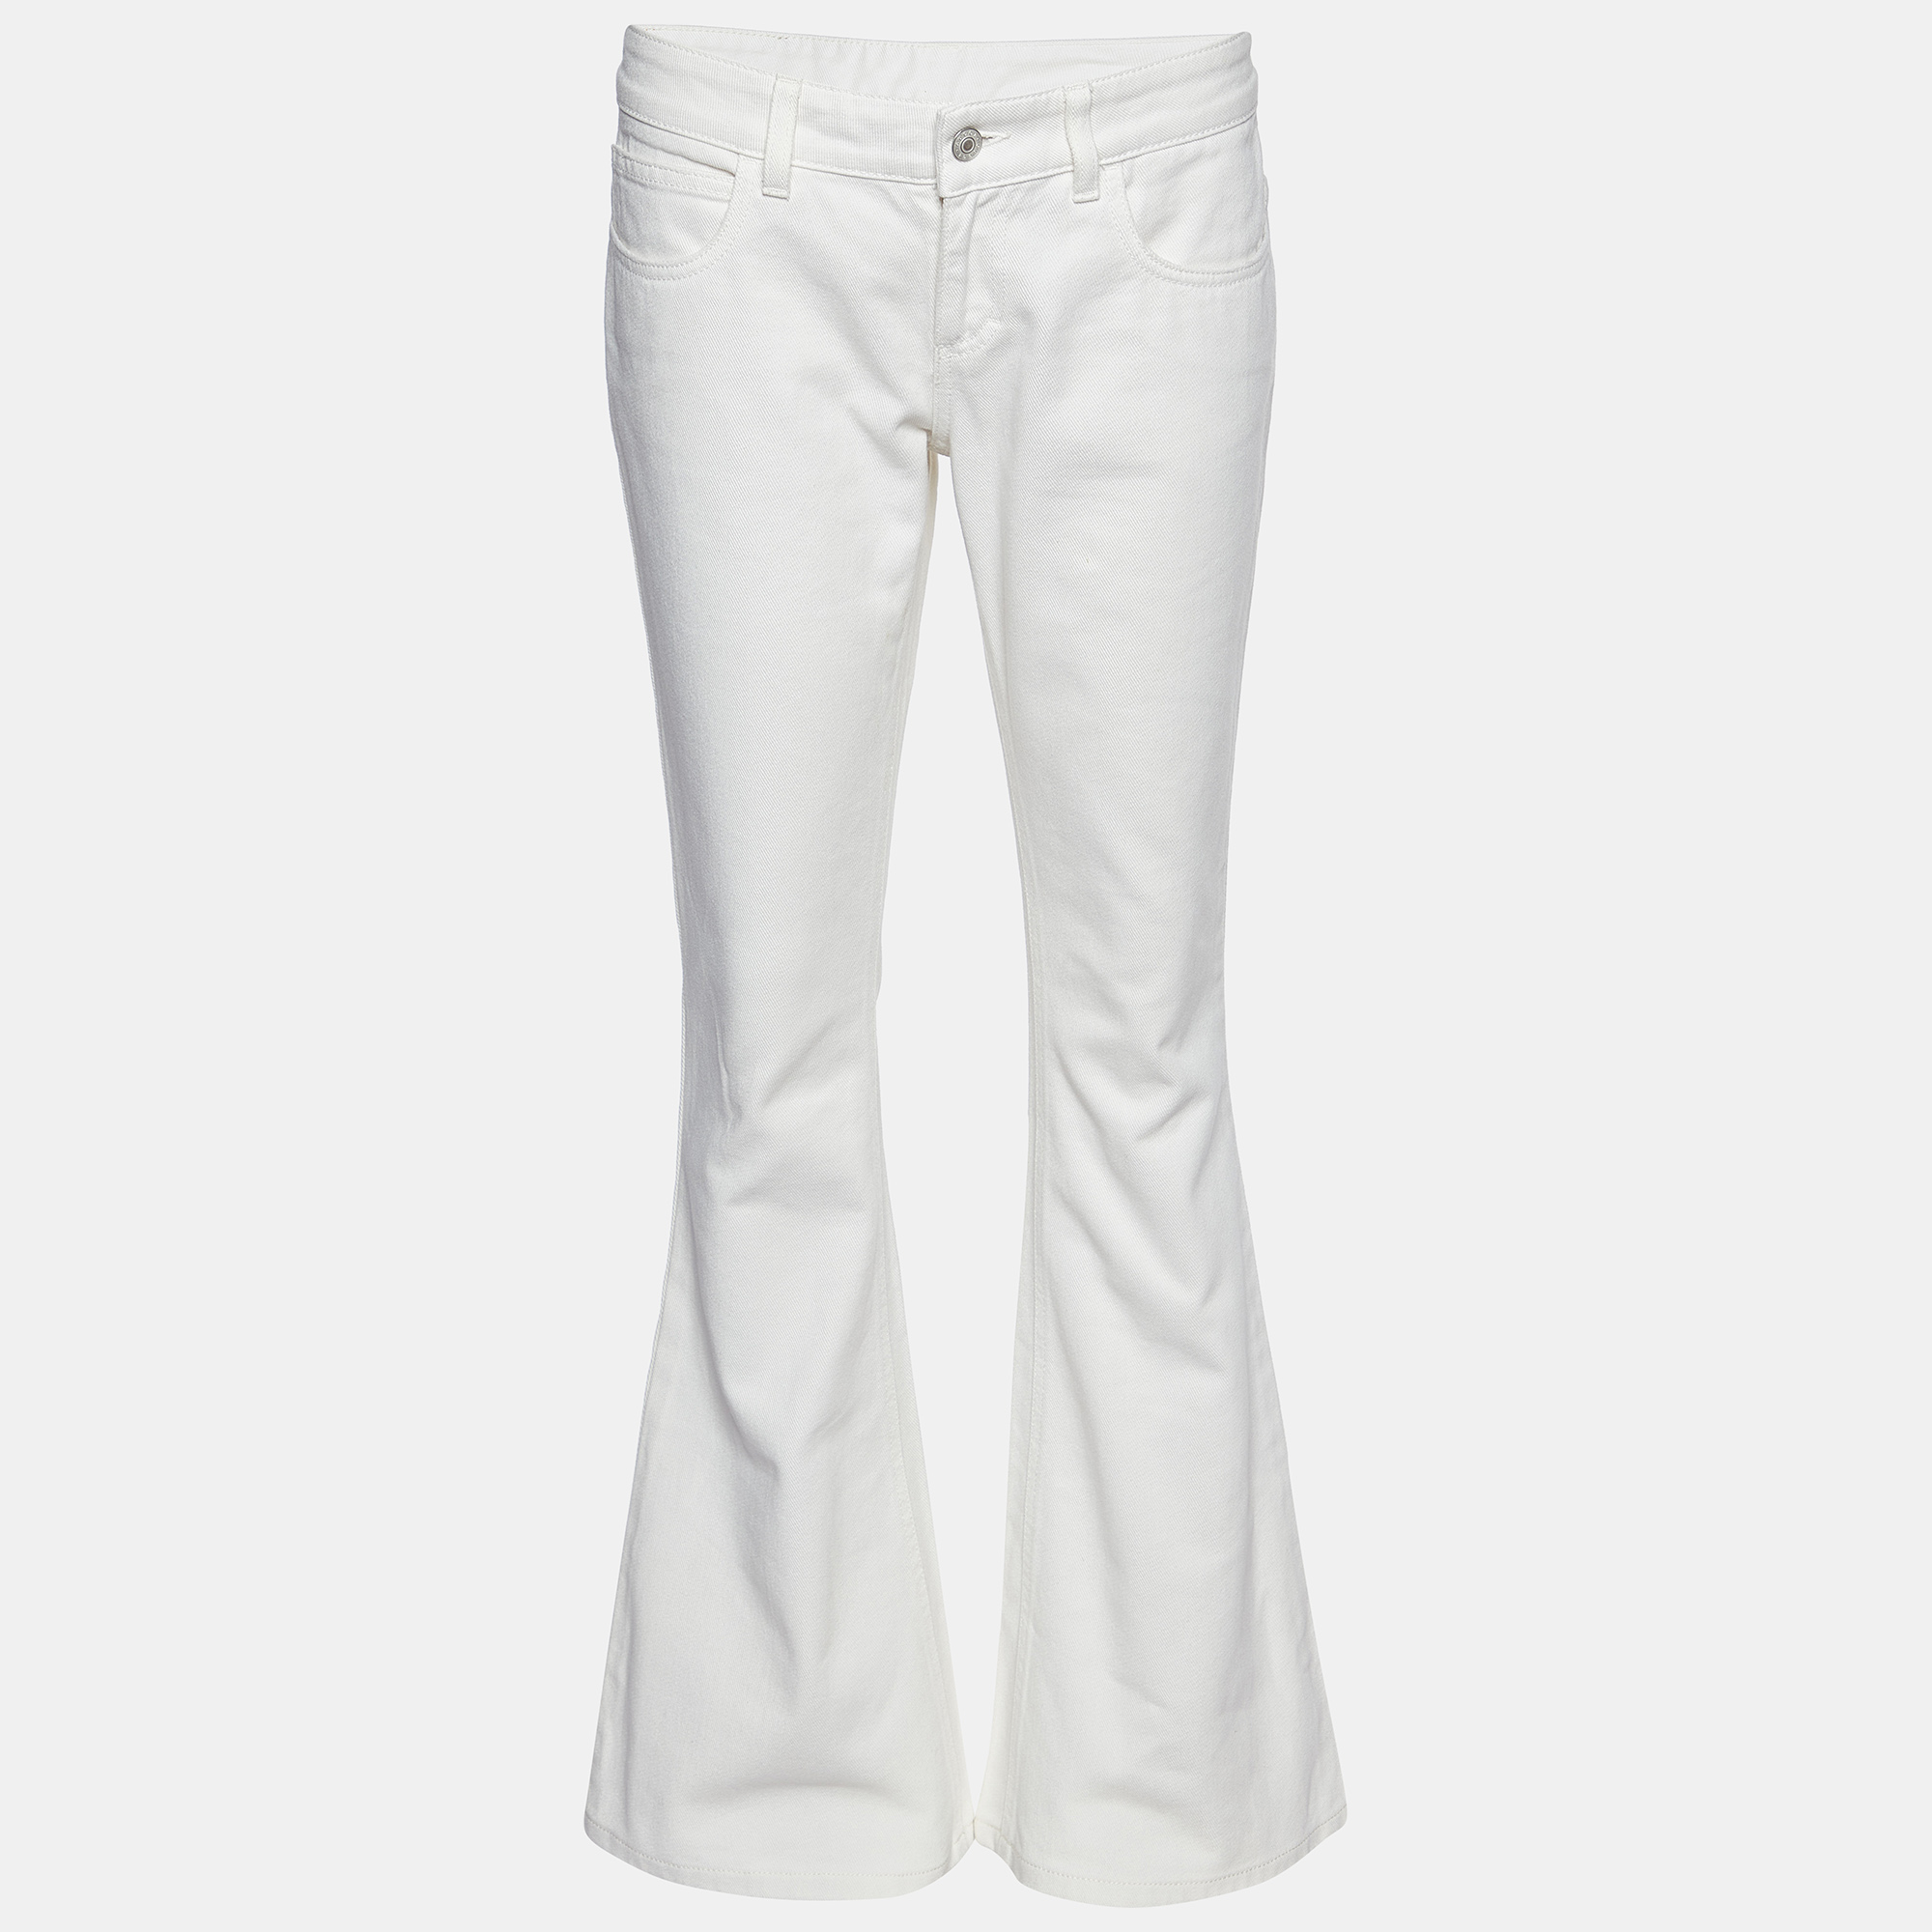 Pre-owned Gucci White Denim New Flare Jeans S/waist 31"